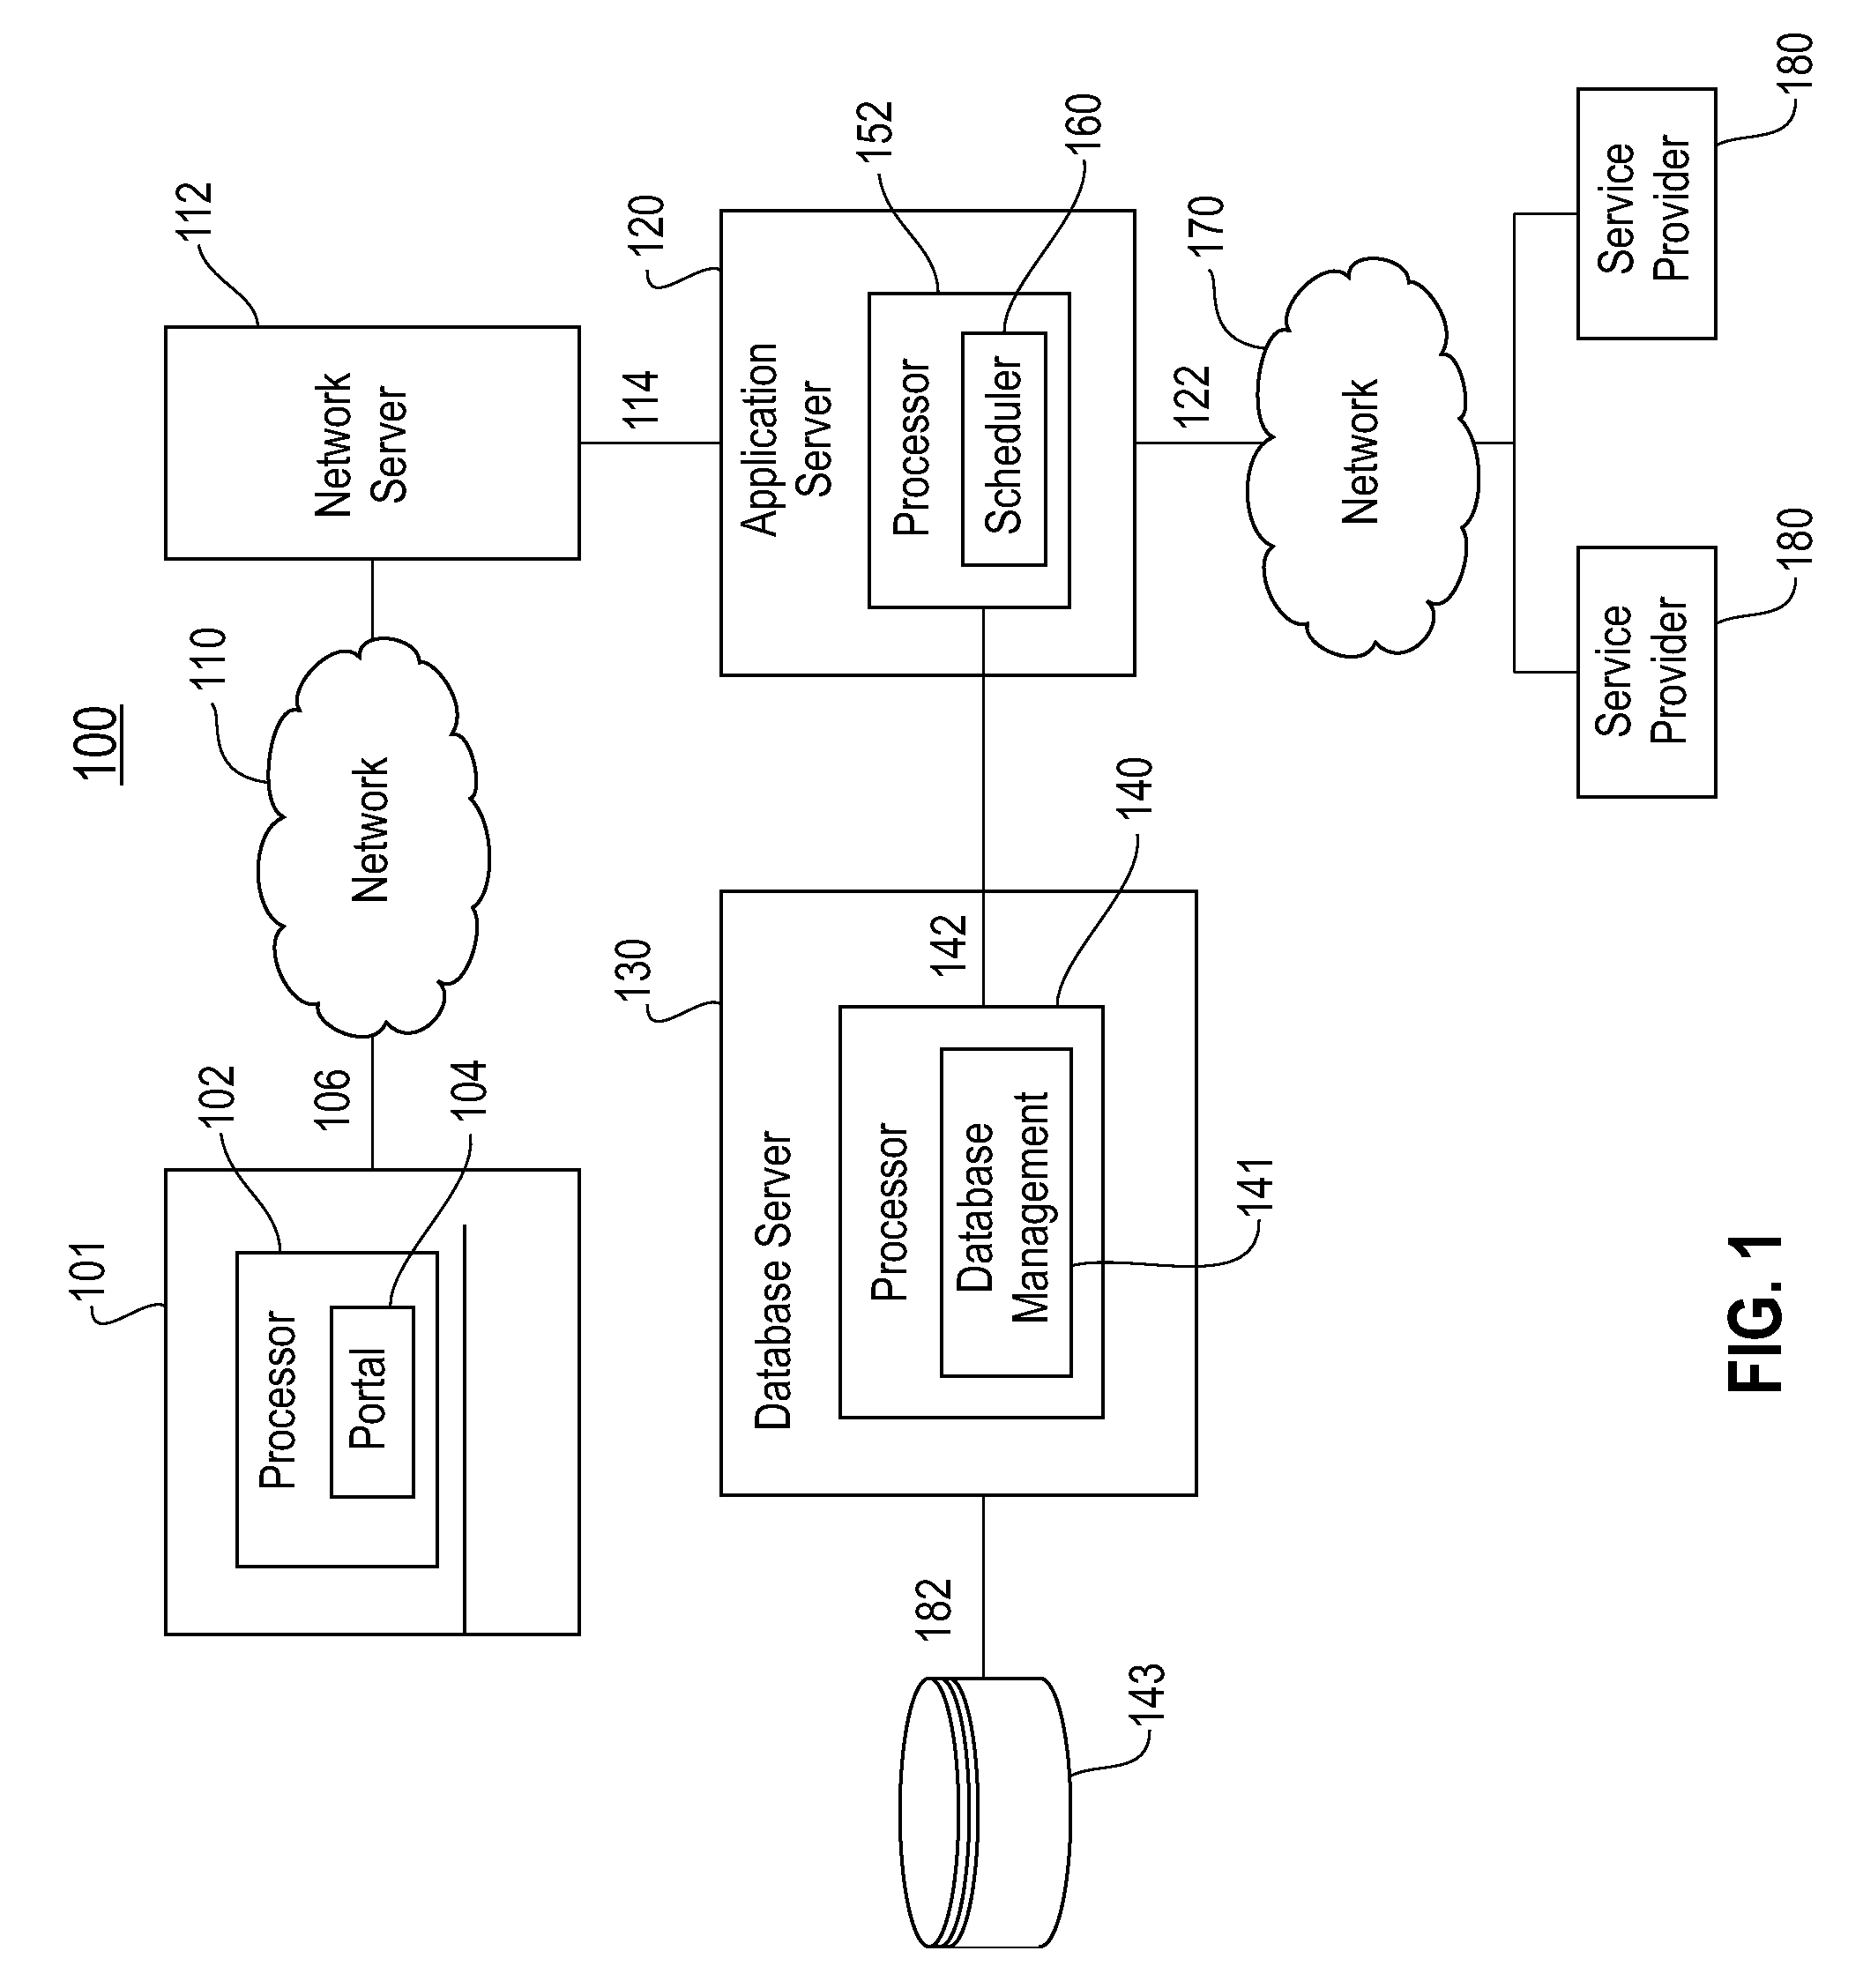 Quality of service aware scheduling for composite web service workflows